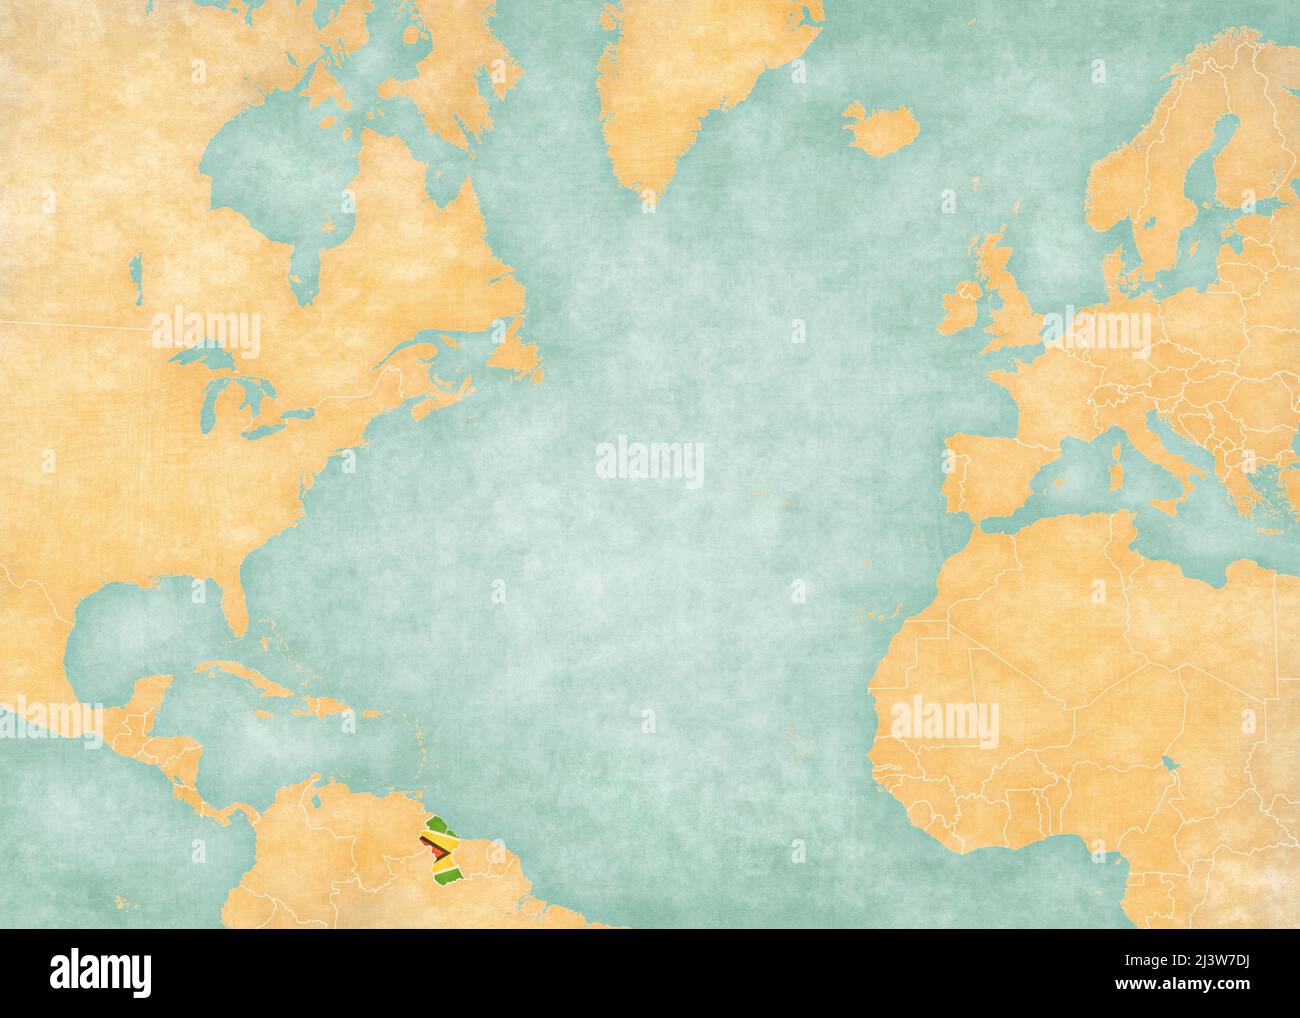 Guyana (Guyanese flag) on the map of North Atlantic Ocean. The Map is in vintage style and sunny mood. The map has soft grunge and vintage atmosphere, Stock Photo